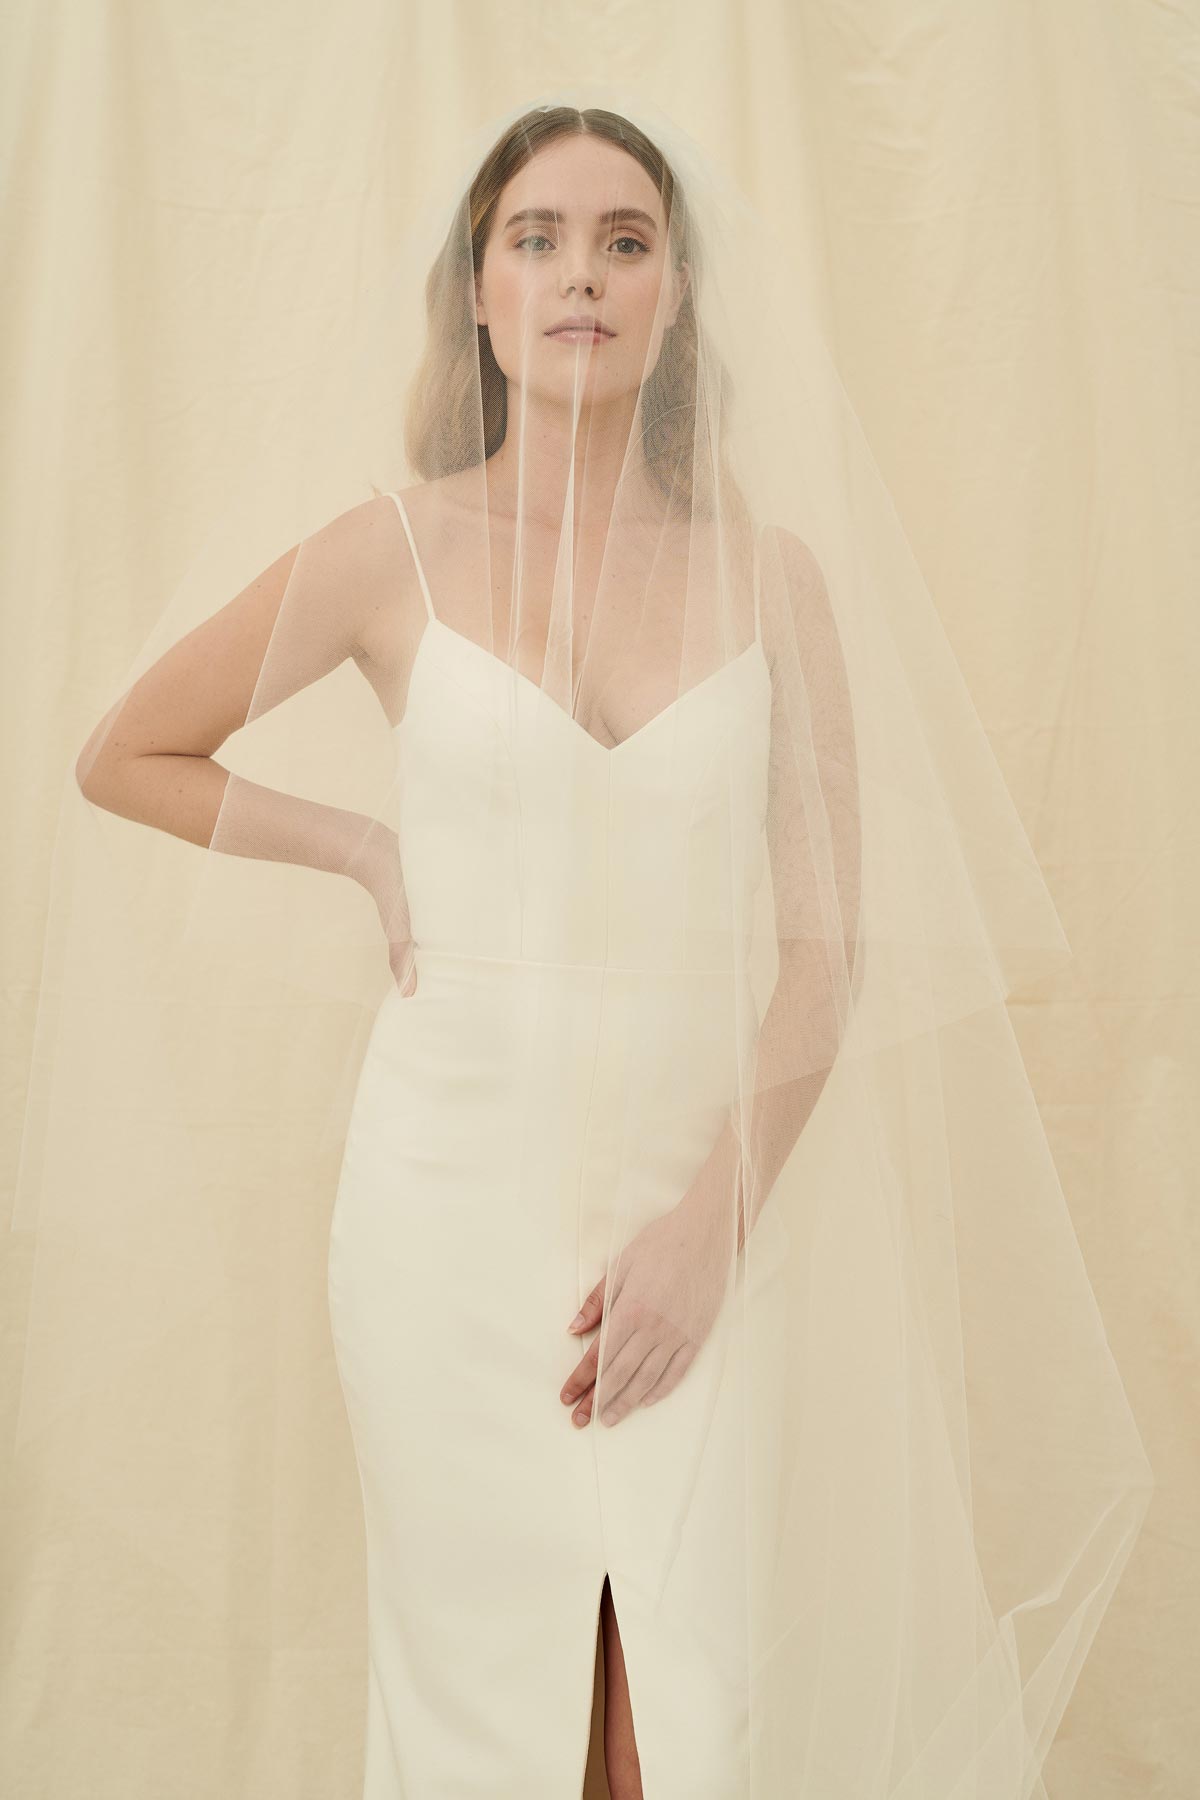 A simple veil with an extra long bottom layer and a front blusher